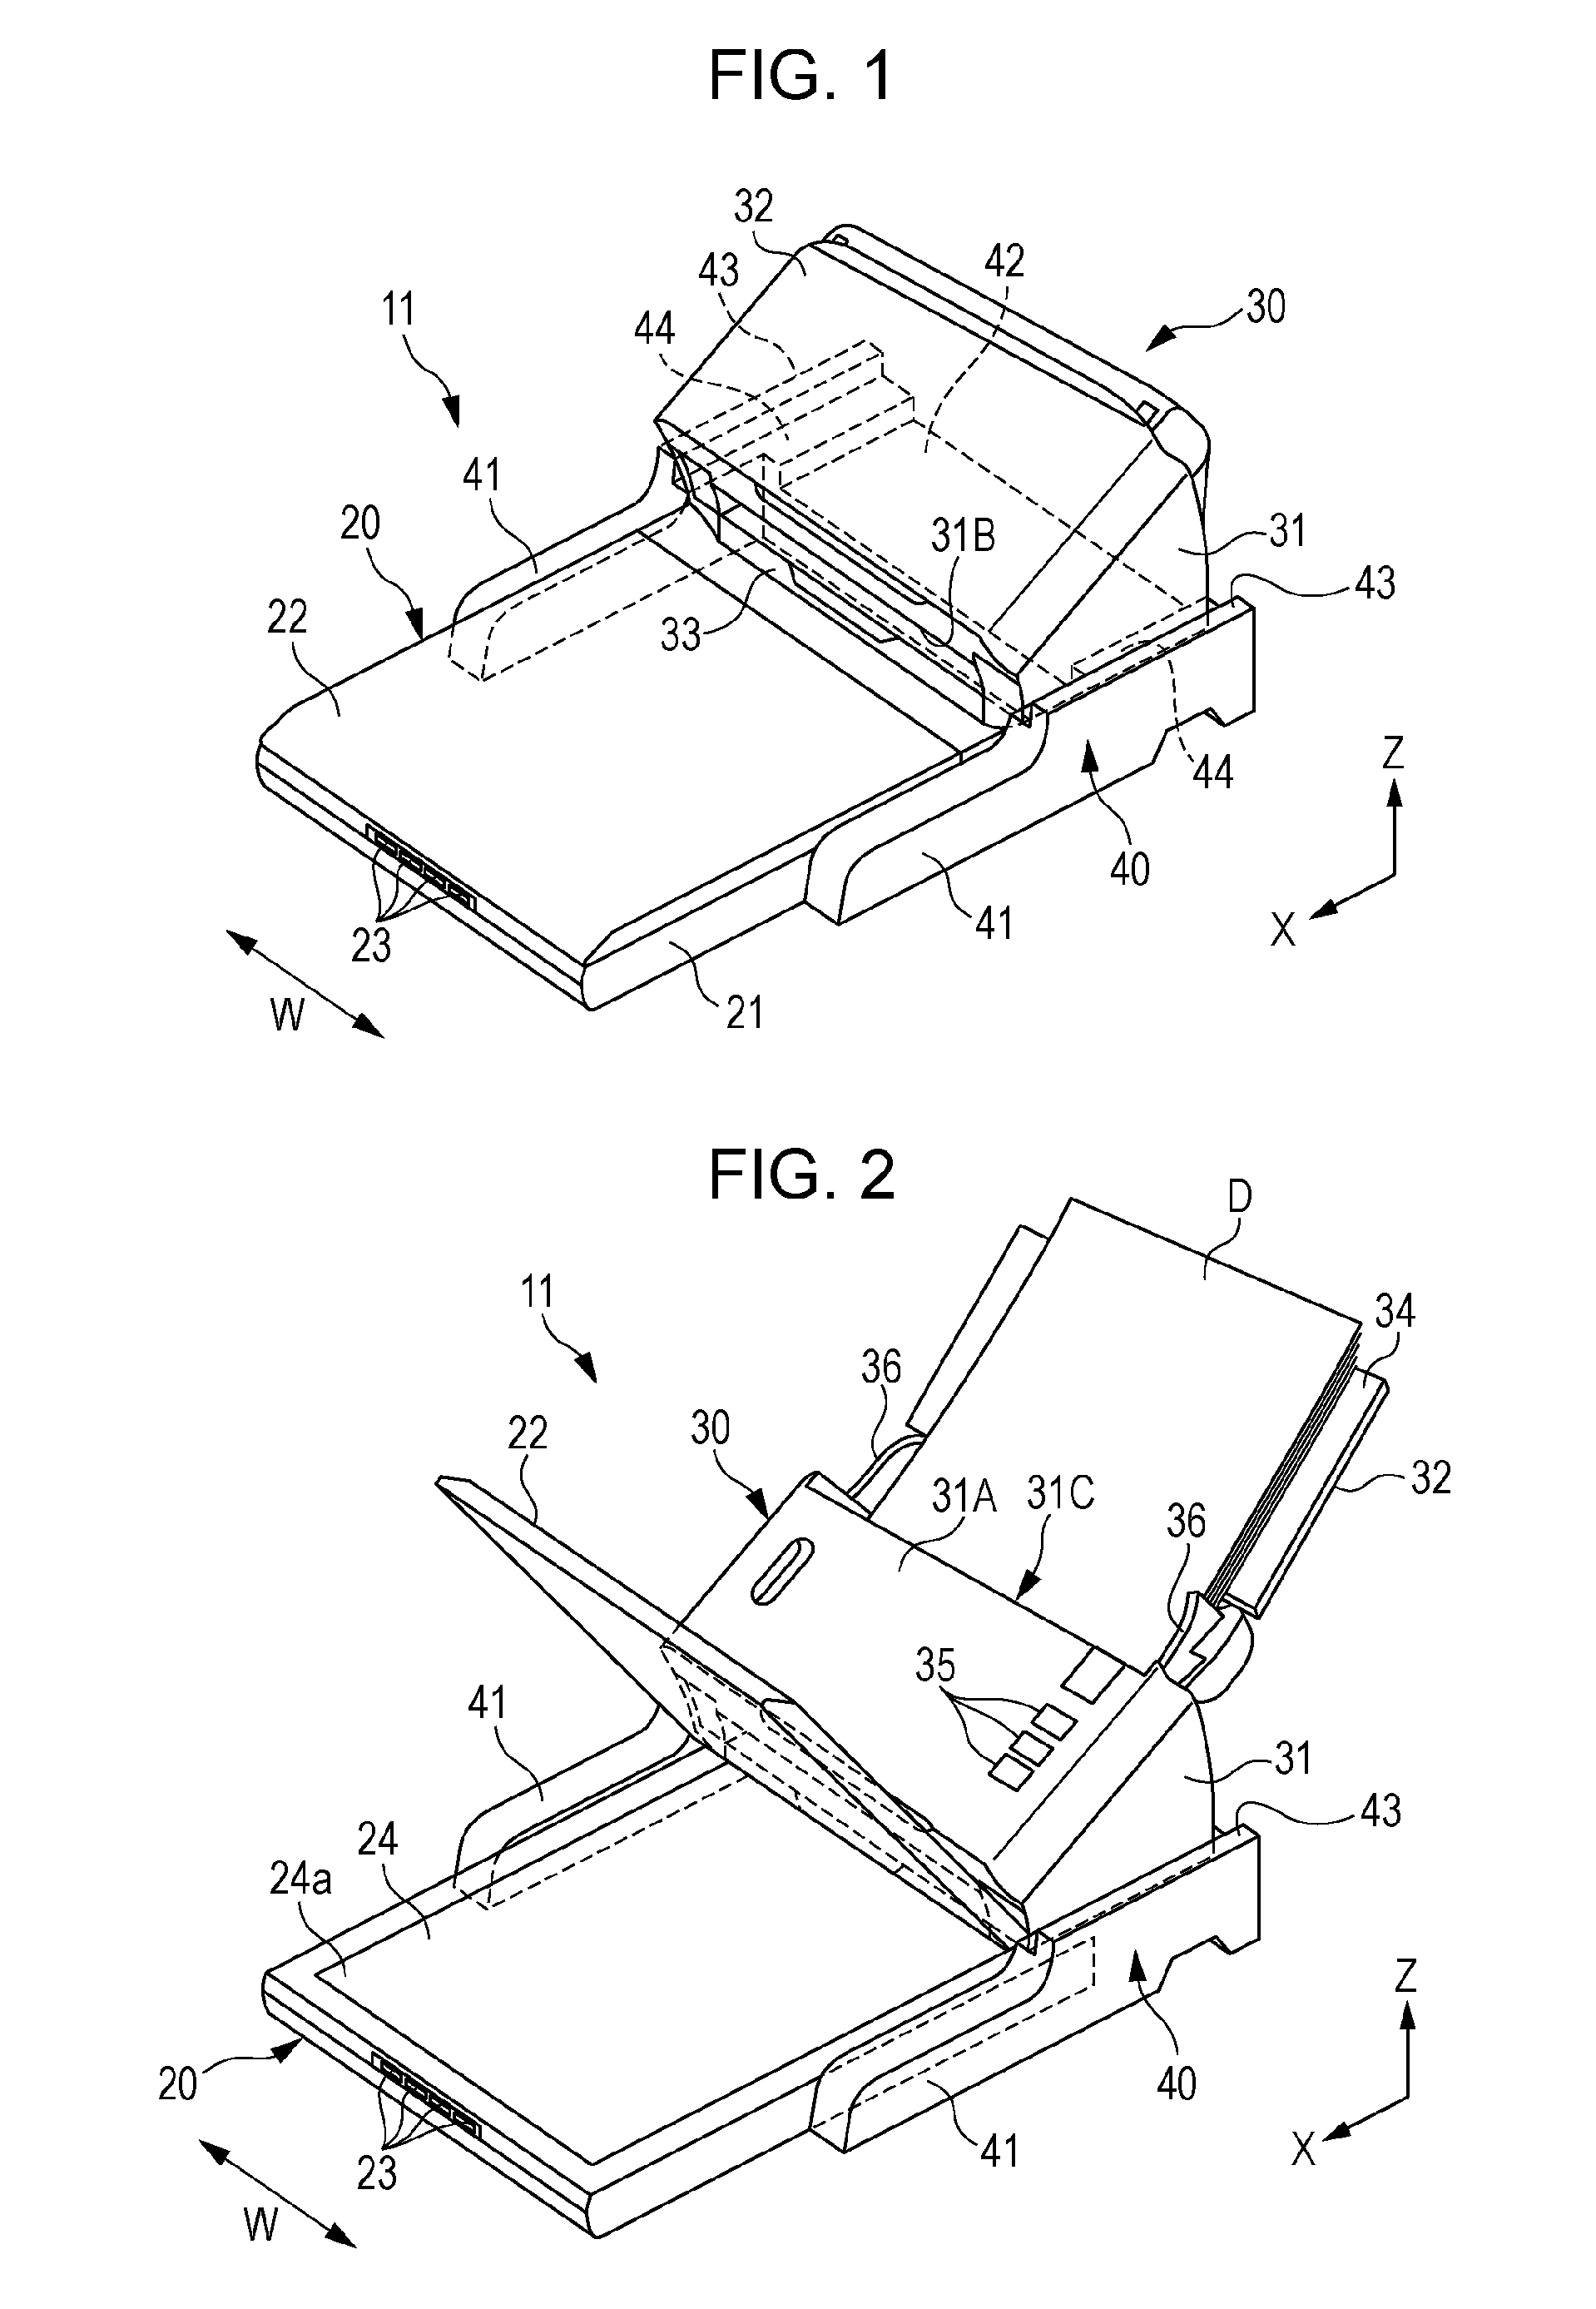 Image formation system and connection unit